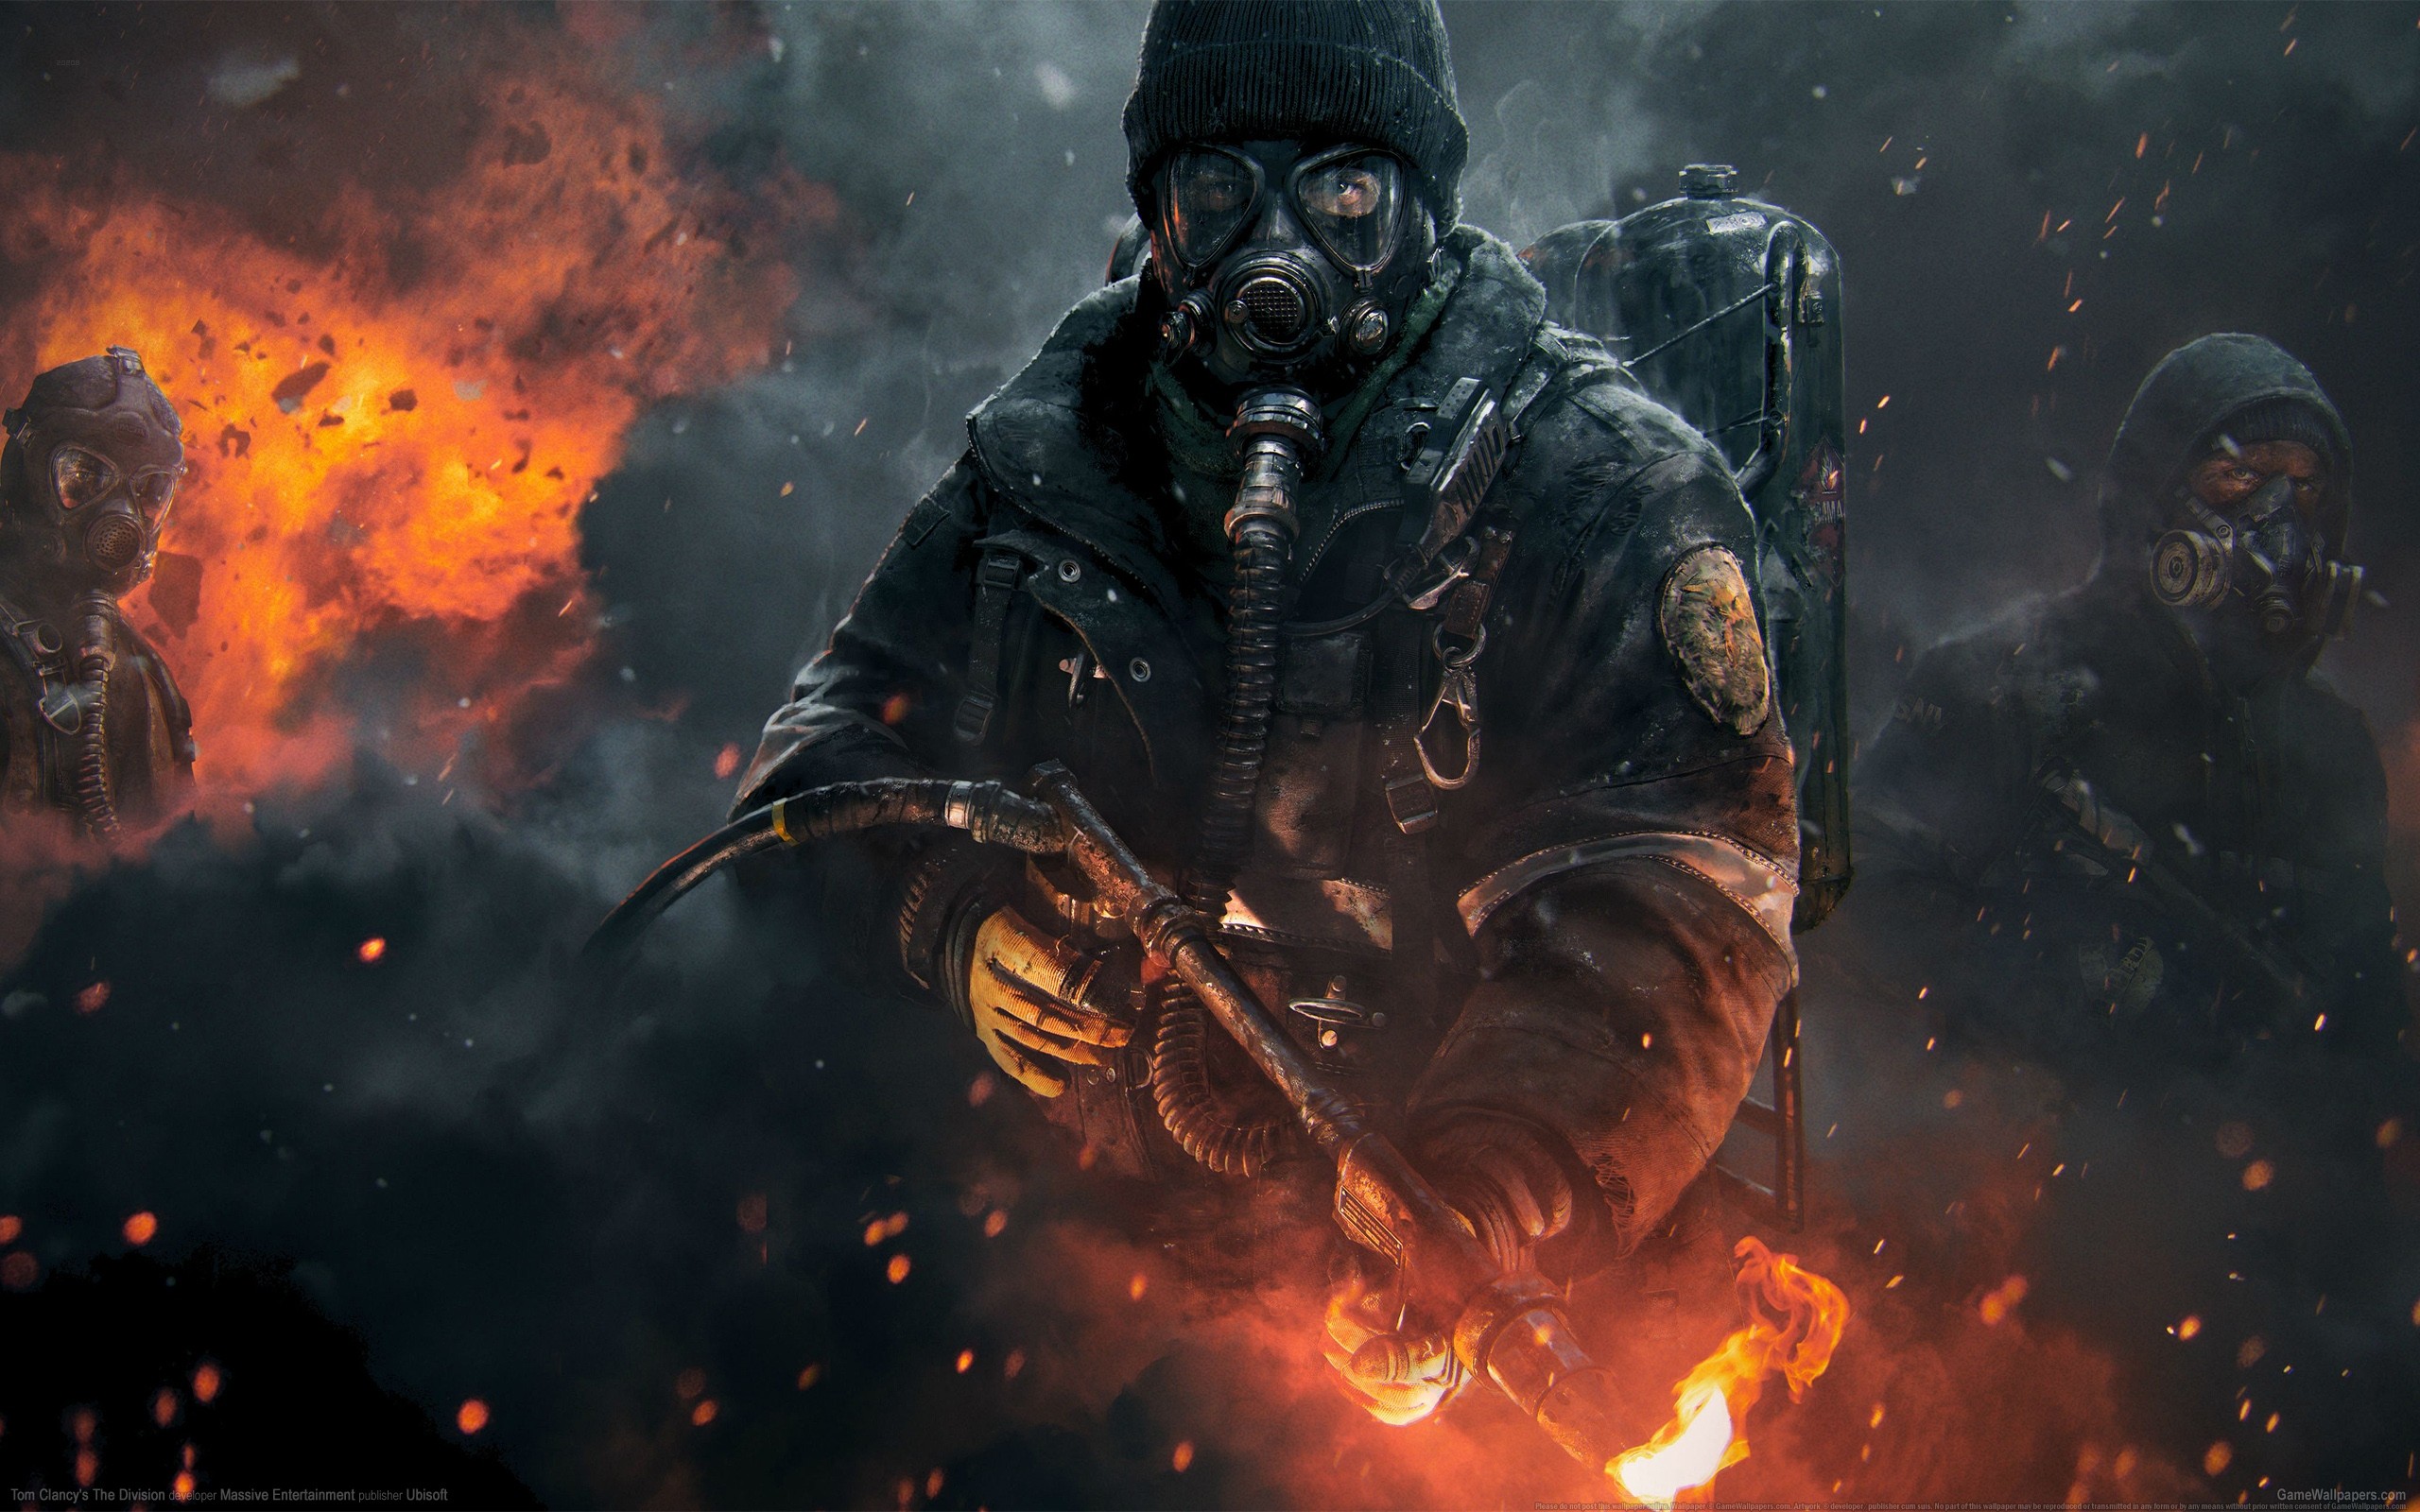 Tom Clancys The Division Flamethrower Video Games PC Gaming Gas Masks Apocalyptic Video Game Art 2560x1600